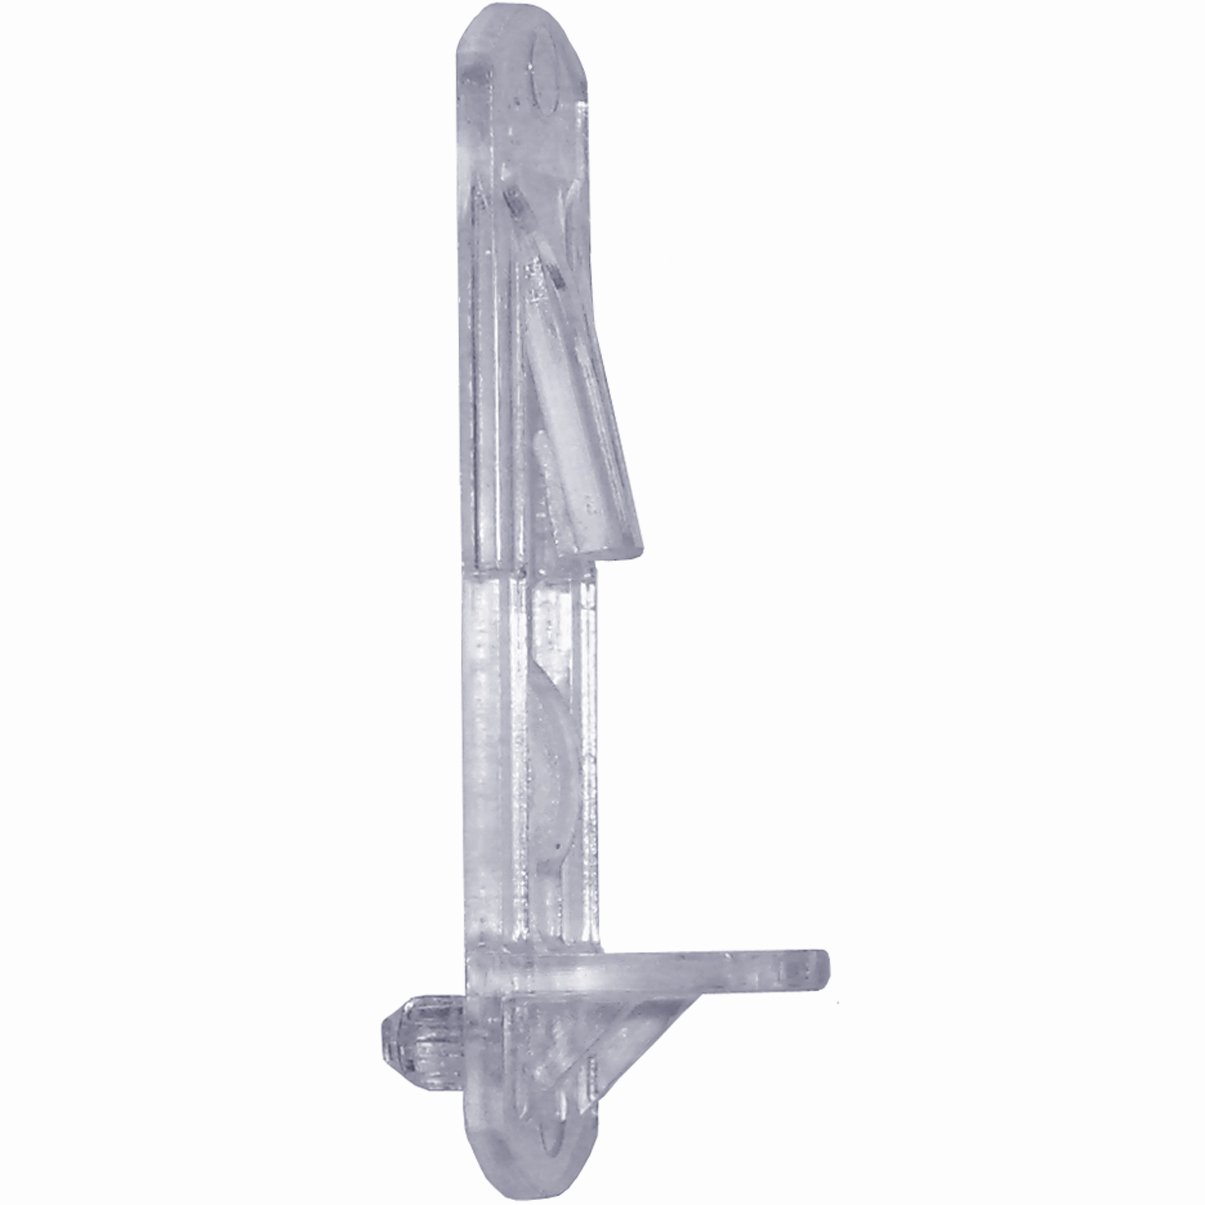 5mm Post Clear Plastic Shelf Support for 3/4" Thick Shelf